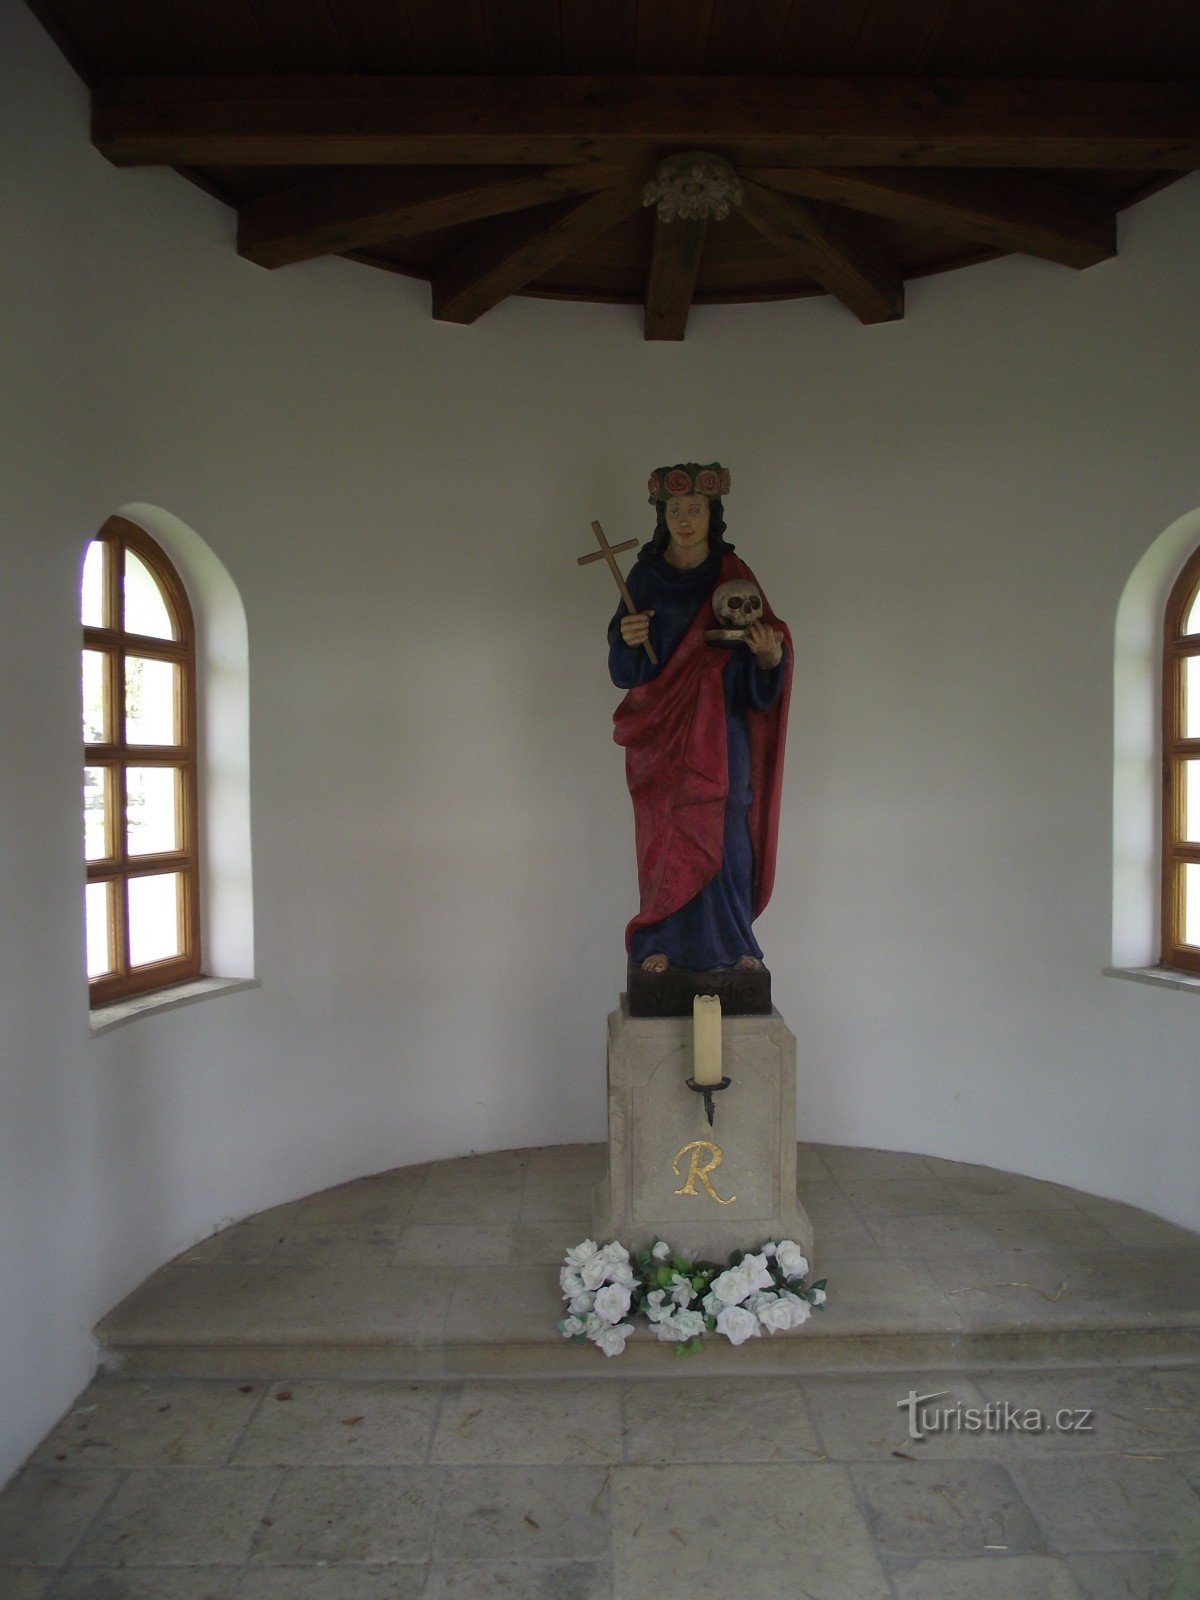 interior of the chapel with the statue of St. Rosalie